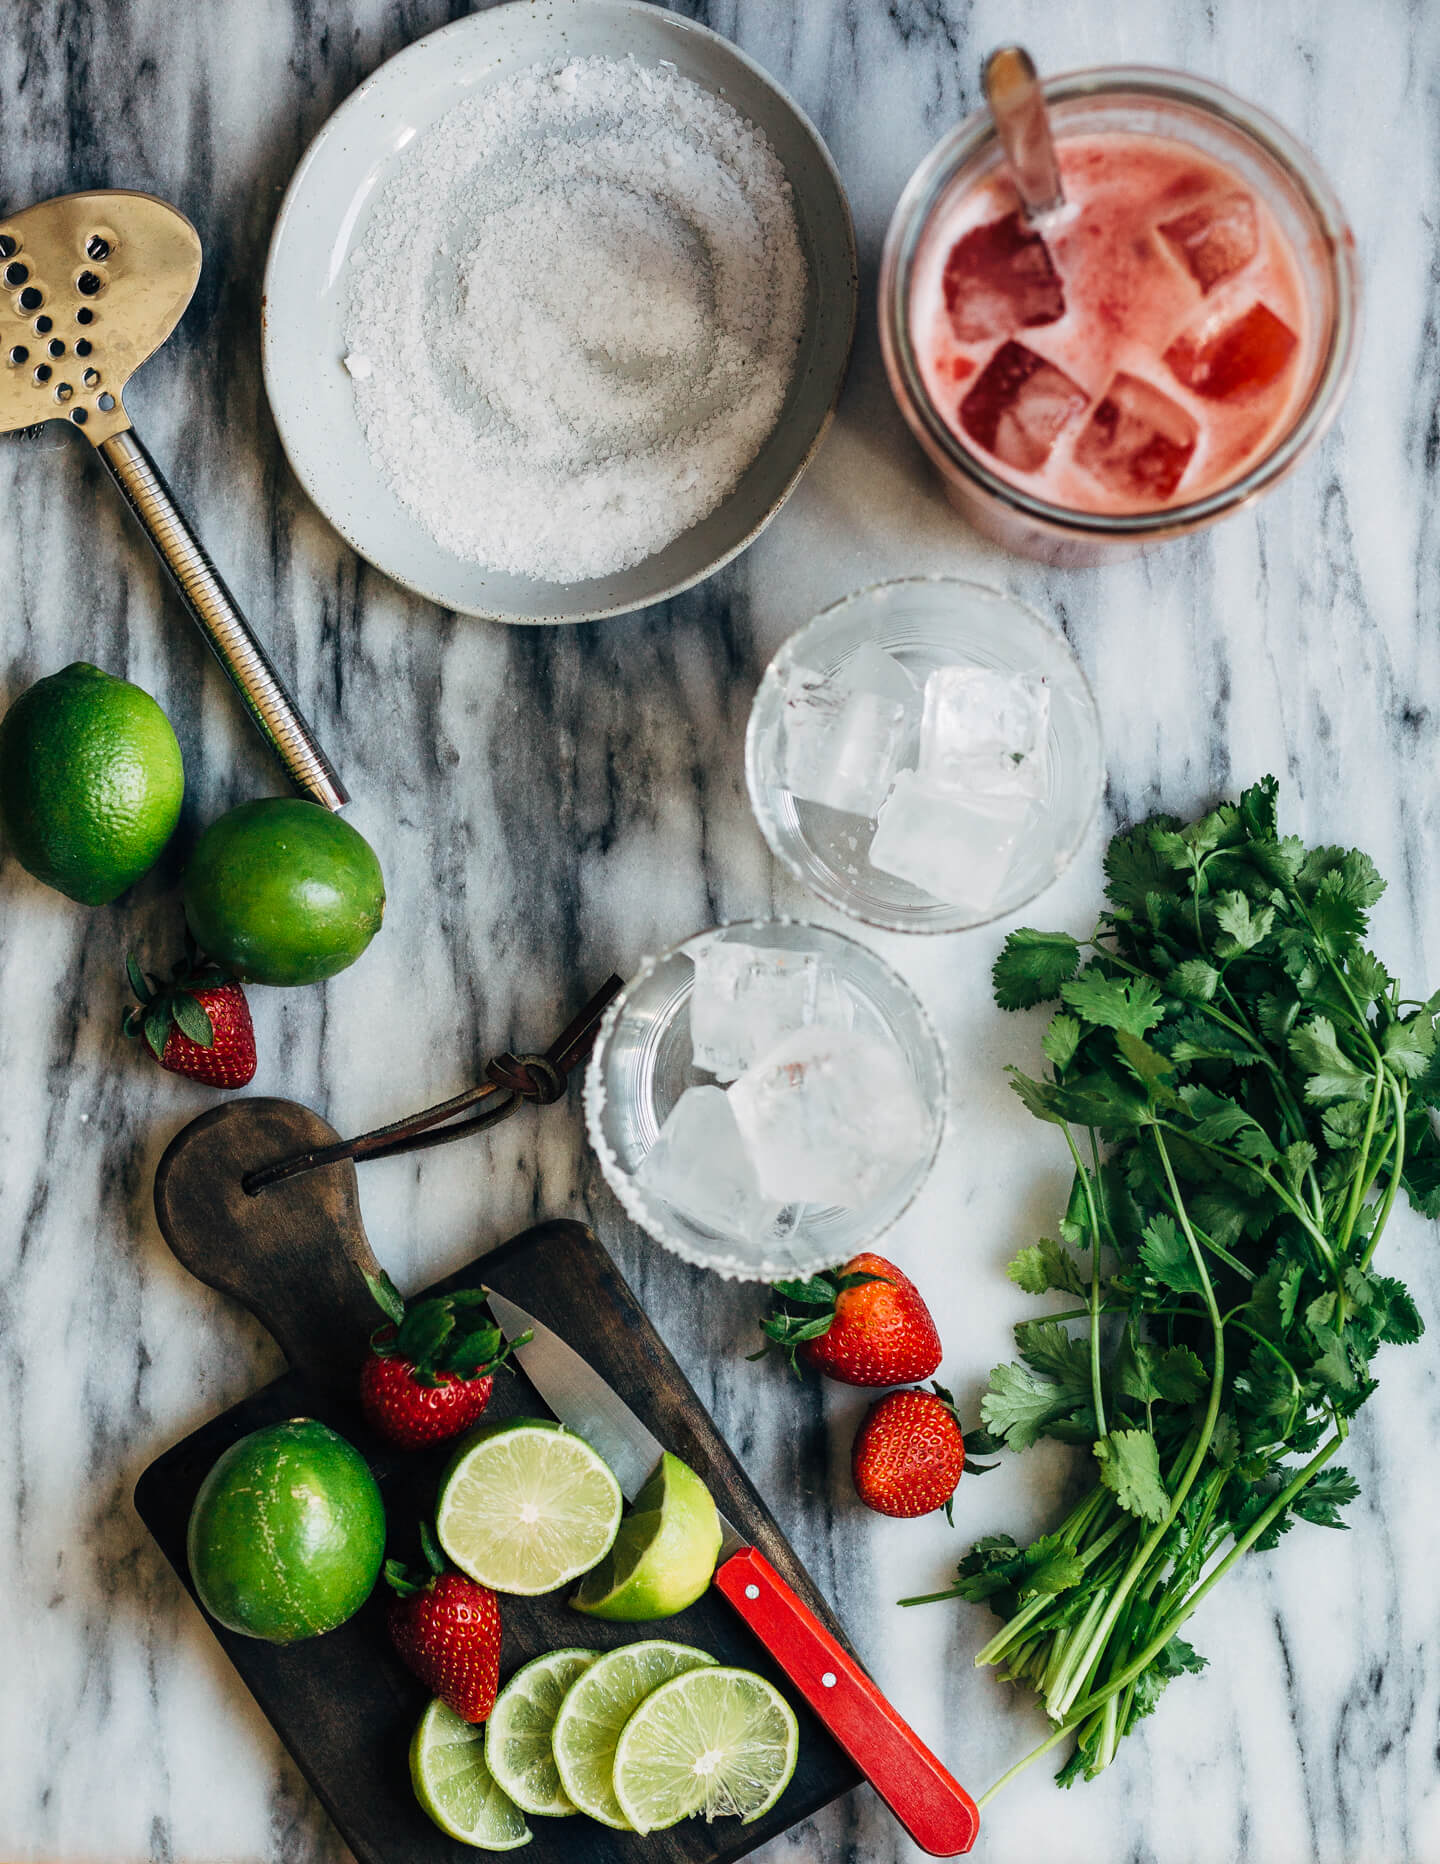 Pretty pink strawberry margaritas blended with an herbaceous cilantro, coriander, and black pepper simple syrup. These fresh strawberry margaritas are beautifully balanced and totally refreshing. 